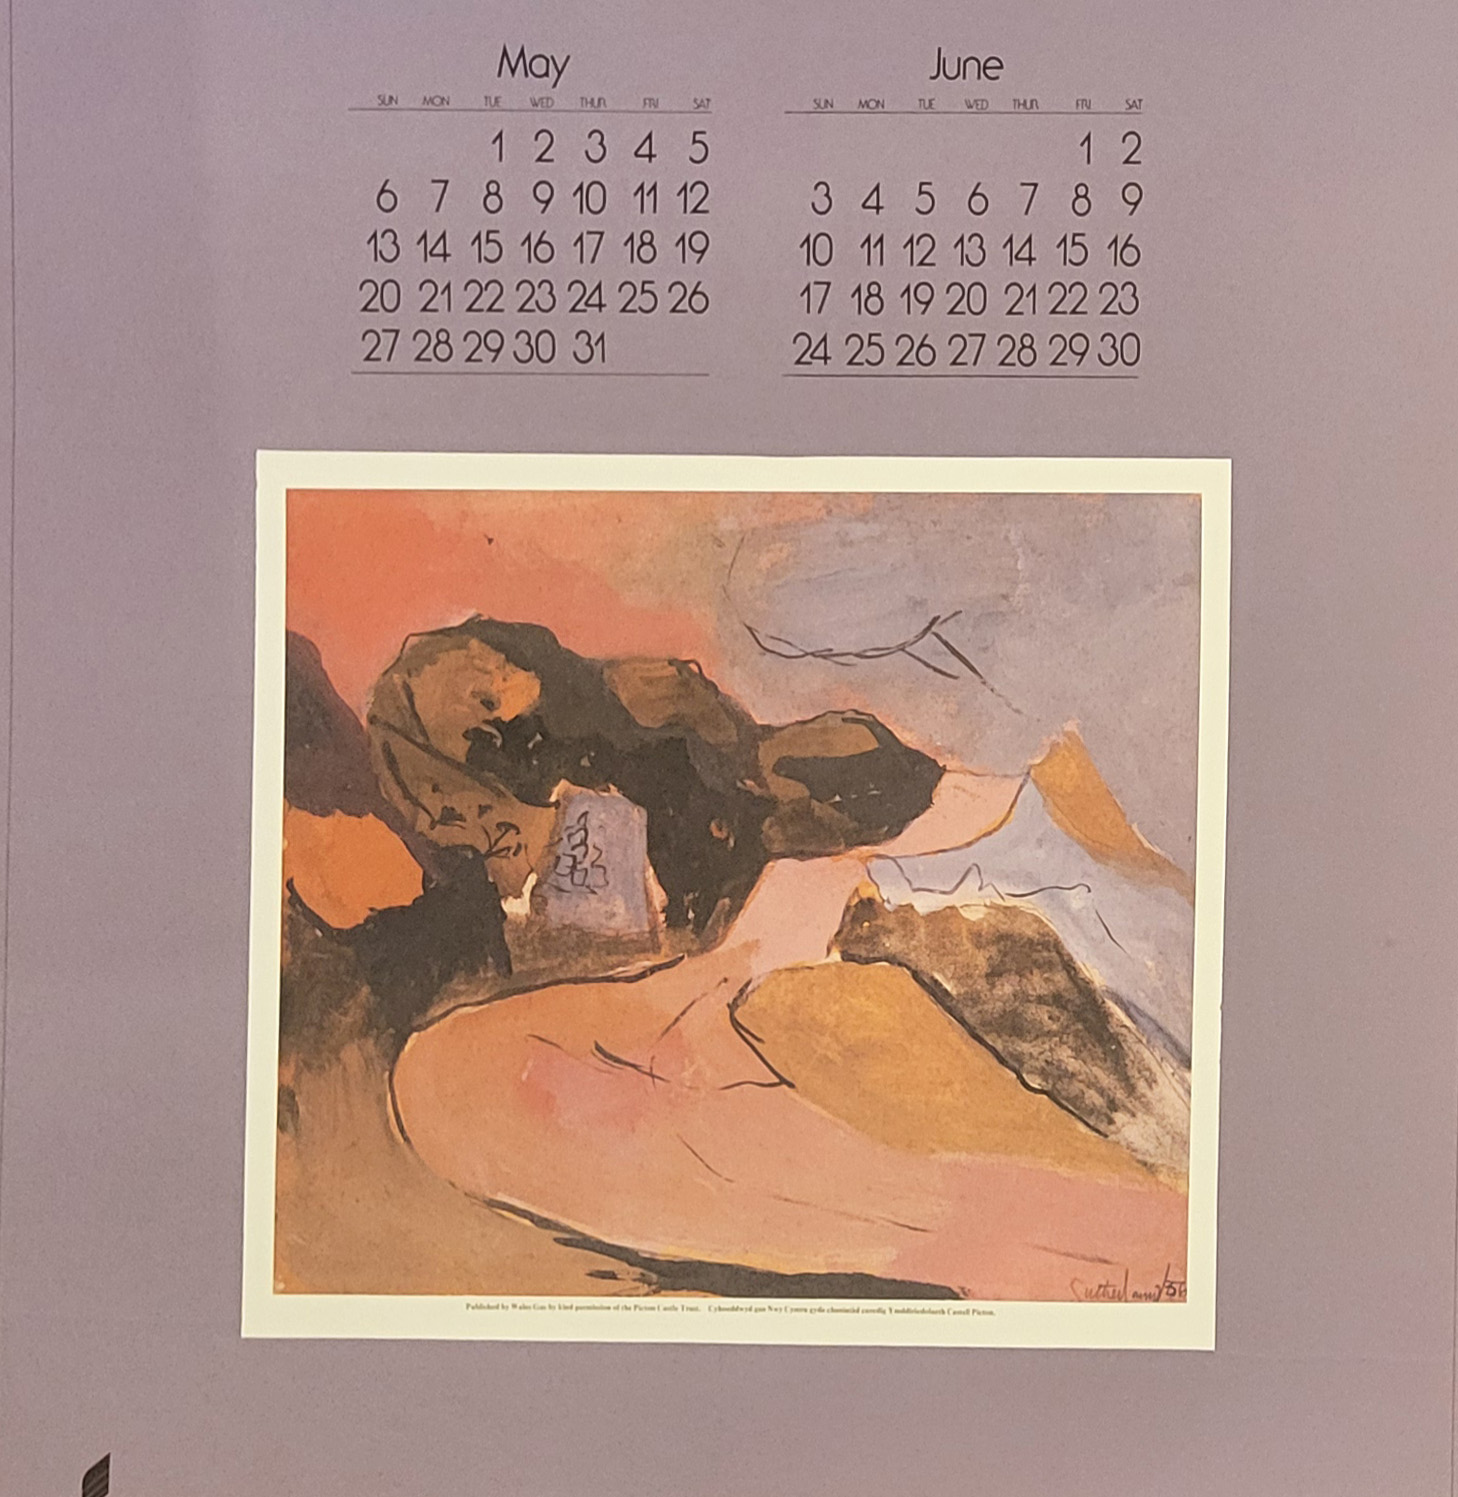 GRAHAM SUTHERLAND, 1903 - 1980, RARE 1979 WALES GAS NWY CYMRU CALENDAR No other examples found. - Image 10 of 13